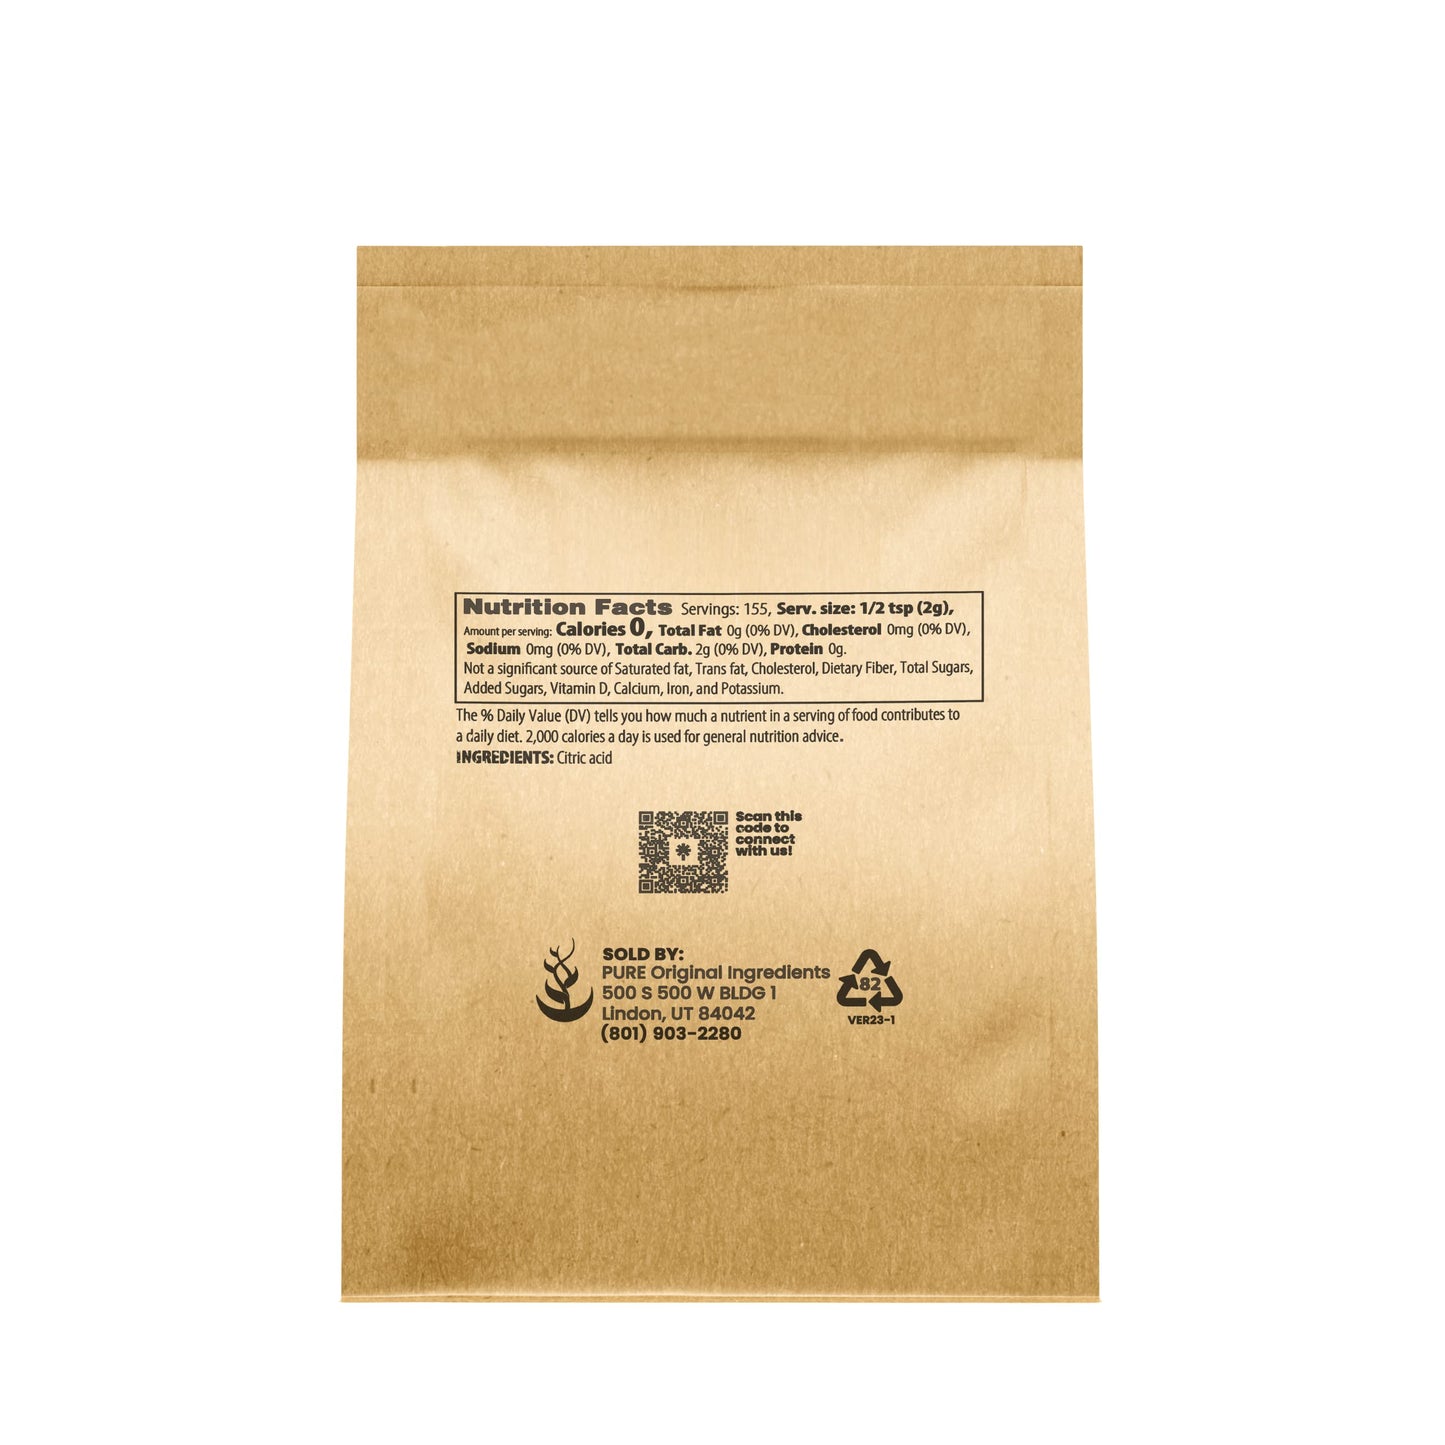 Citric Acid (11 oz) Eco-Friendly Packaging